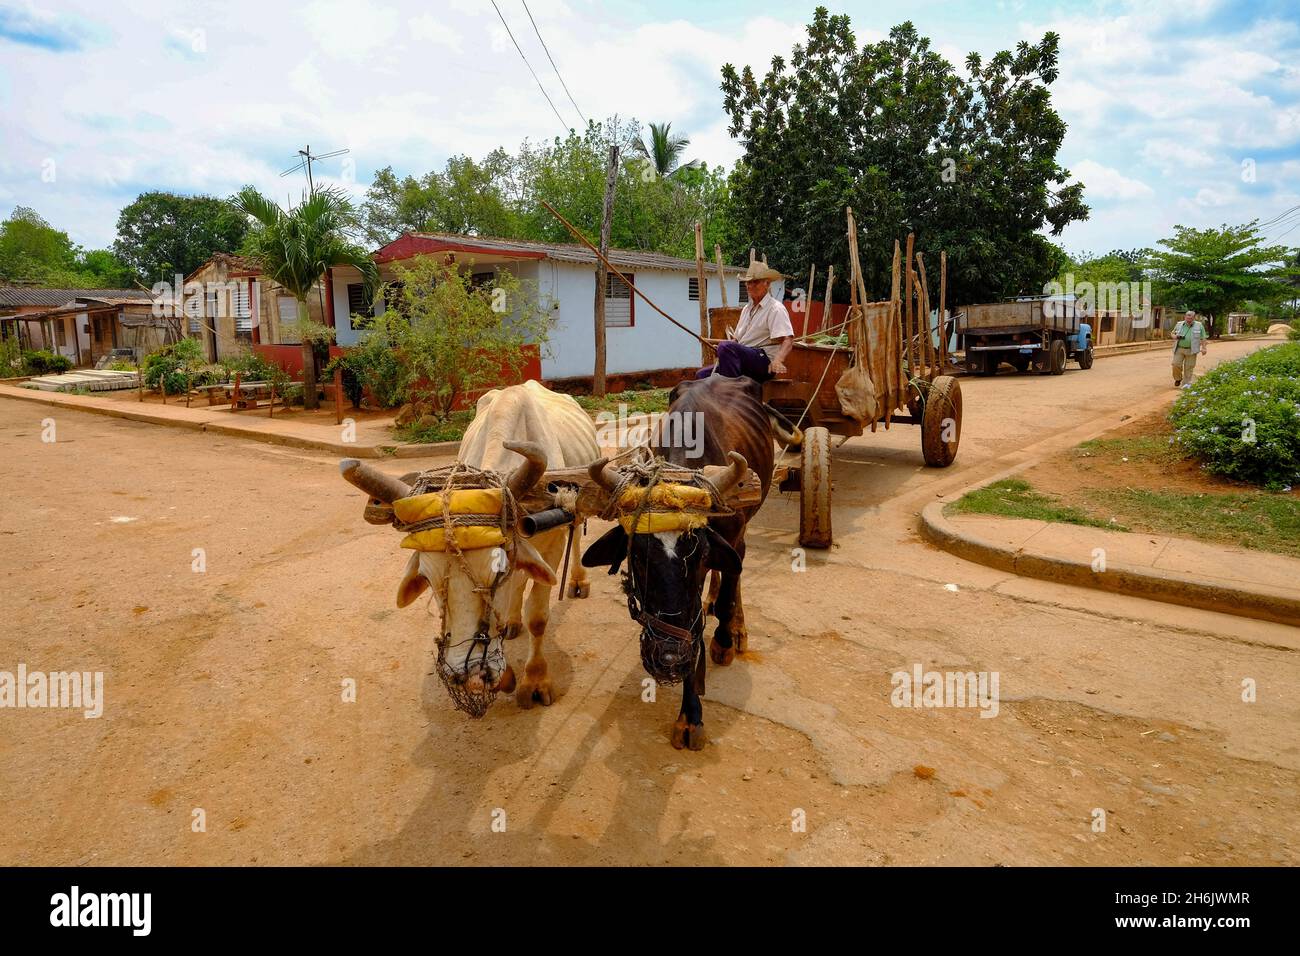 A farmer drives a carriage pulled by two animals, Australia, Matanzas, Cuba, West Indies, Central America Stock Photo